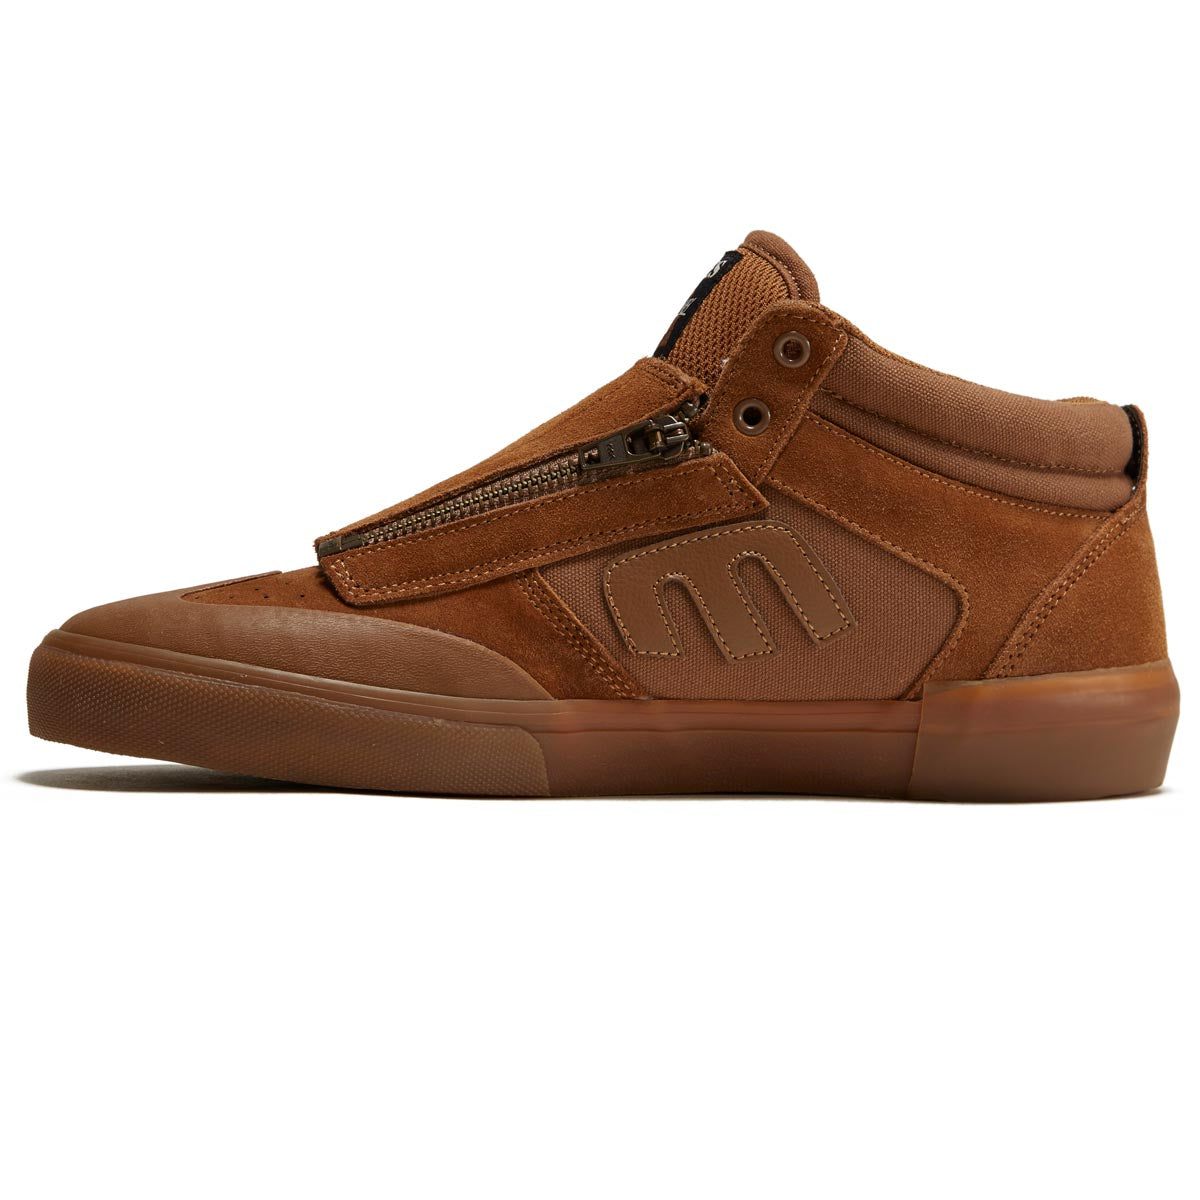 Etnies Windrow Vulc Mid Shoes - Brown/Gum image 2